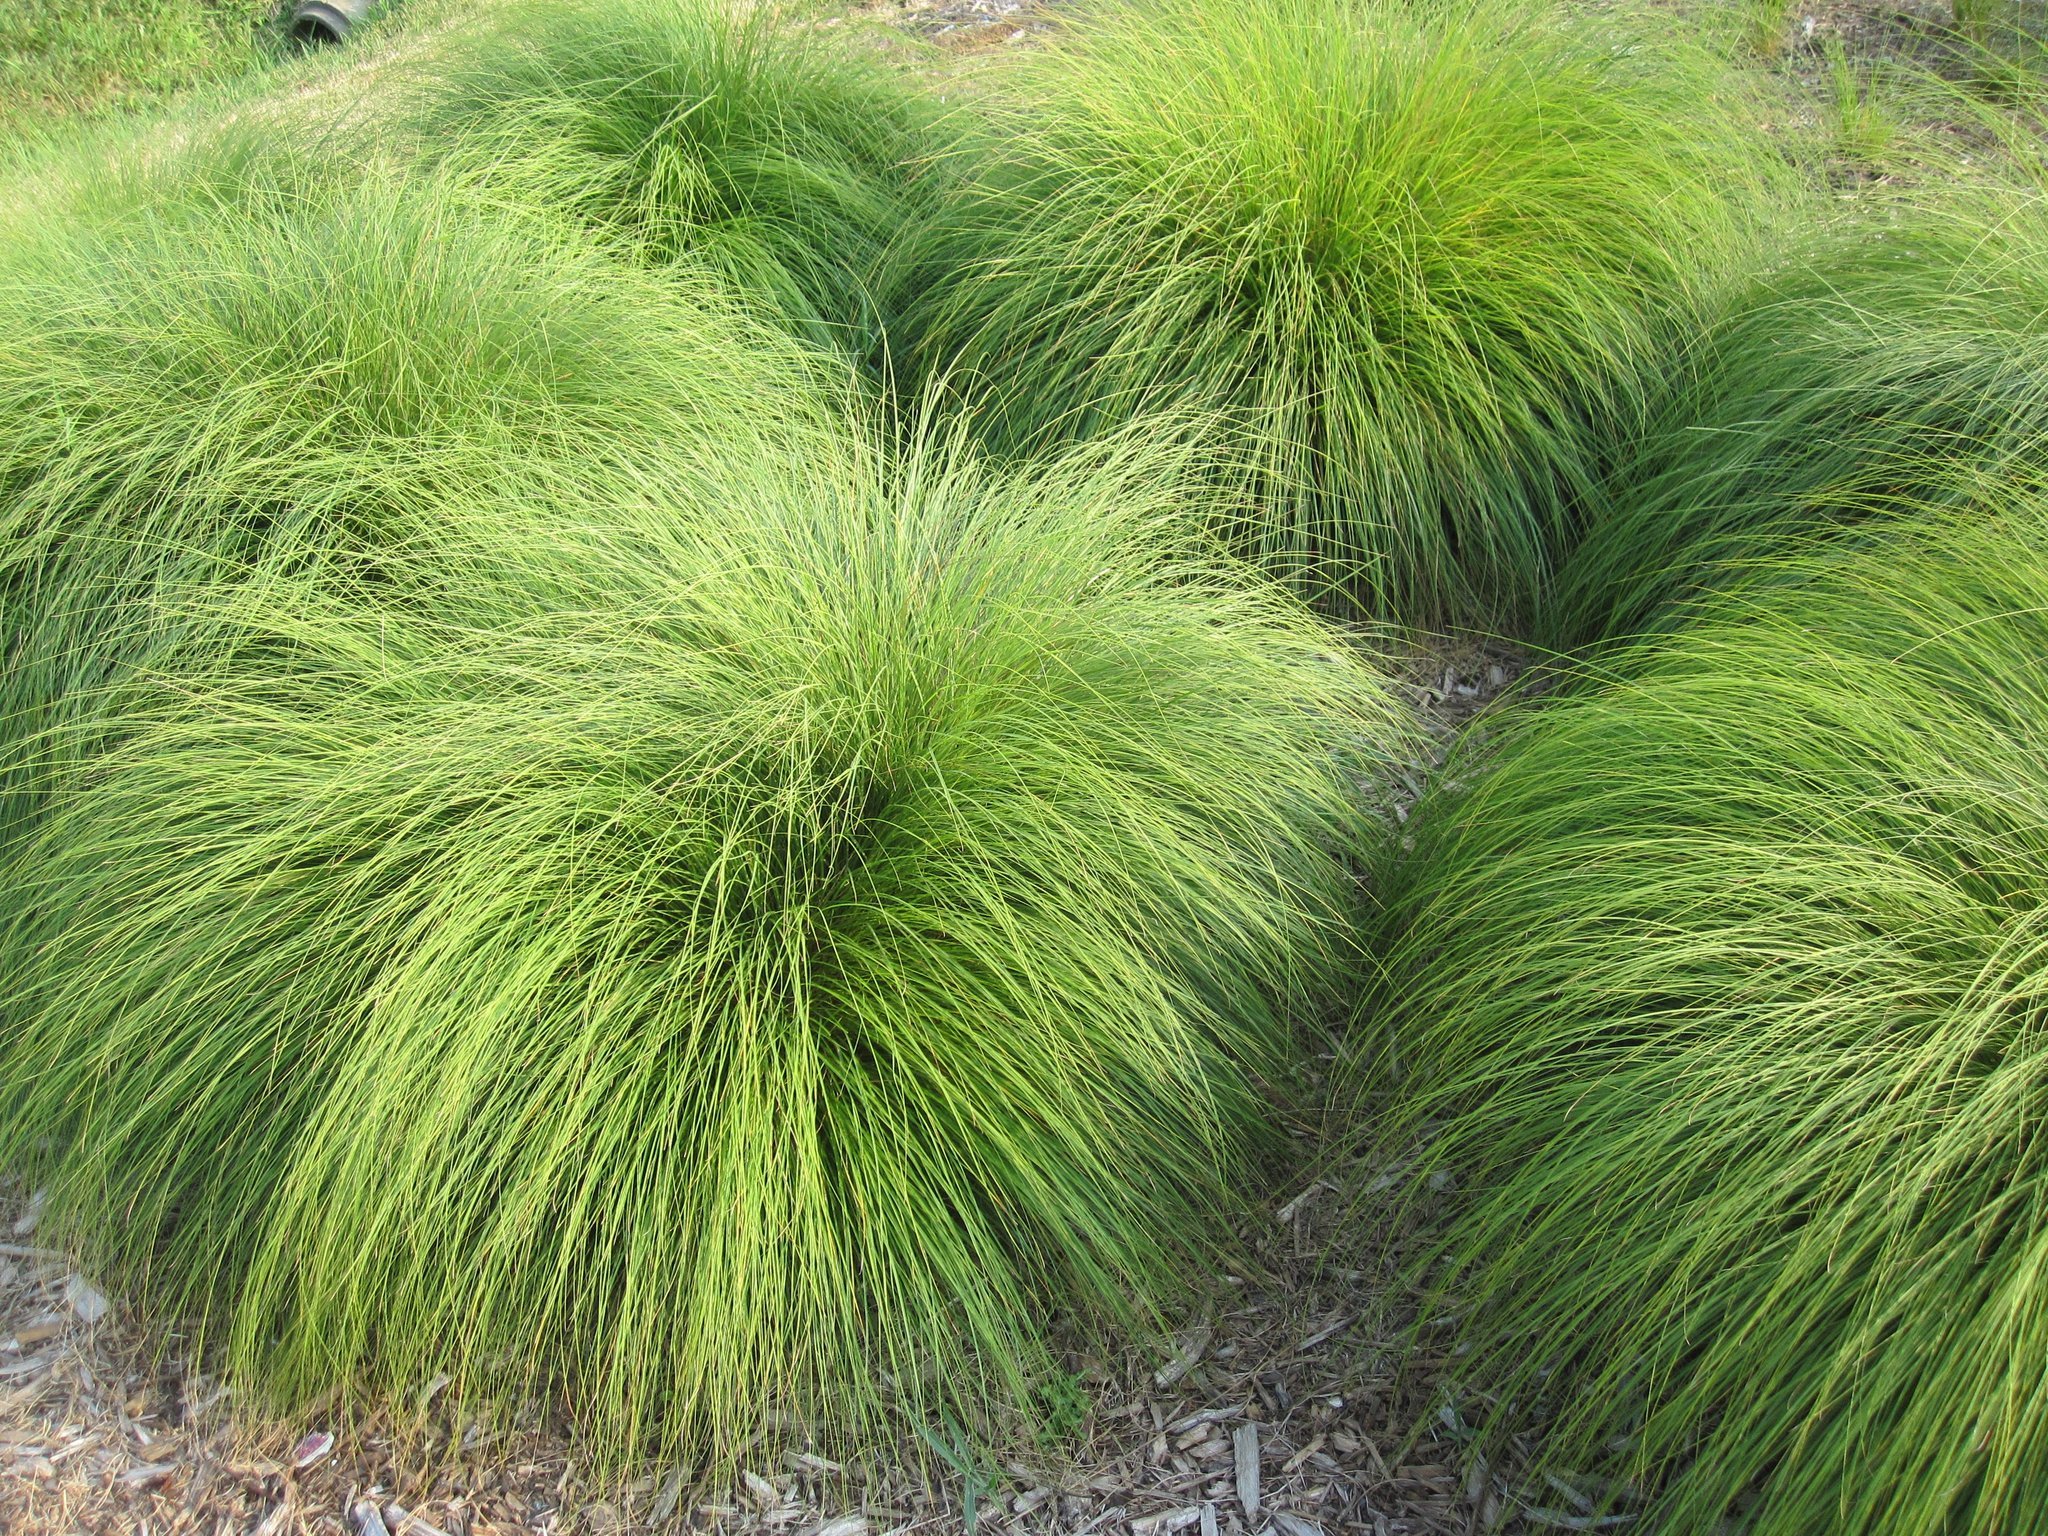 Some decorative grasses spell trouble, but attractive alternatives